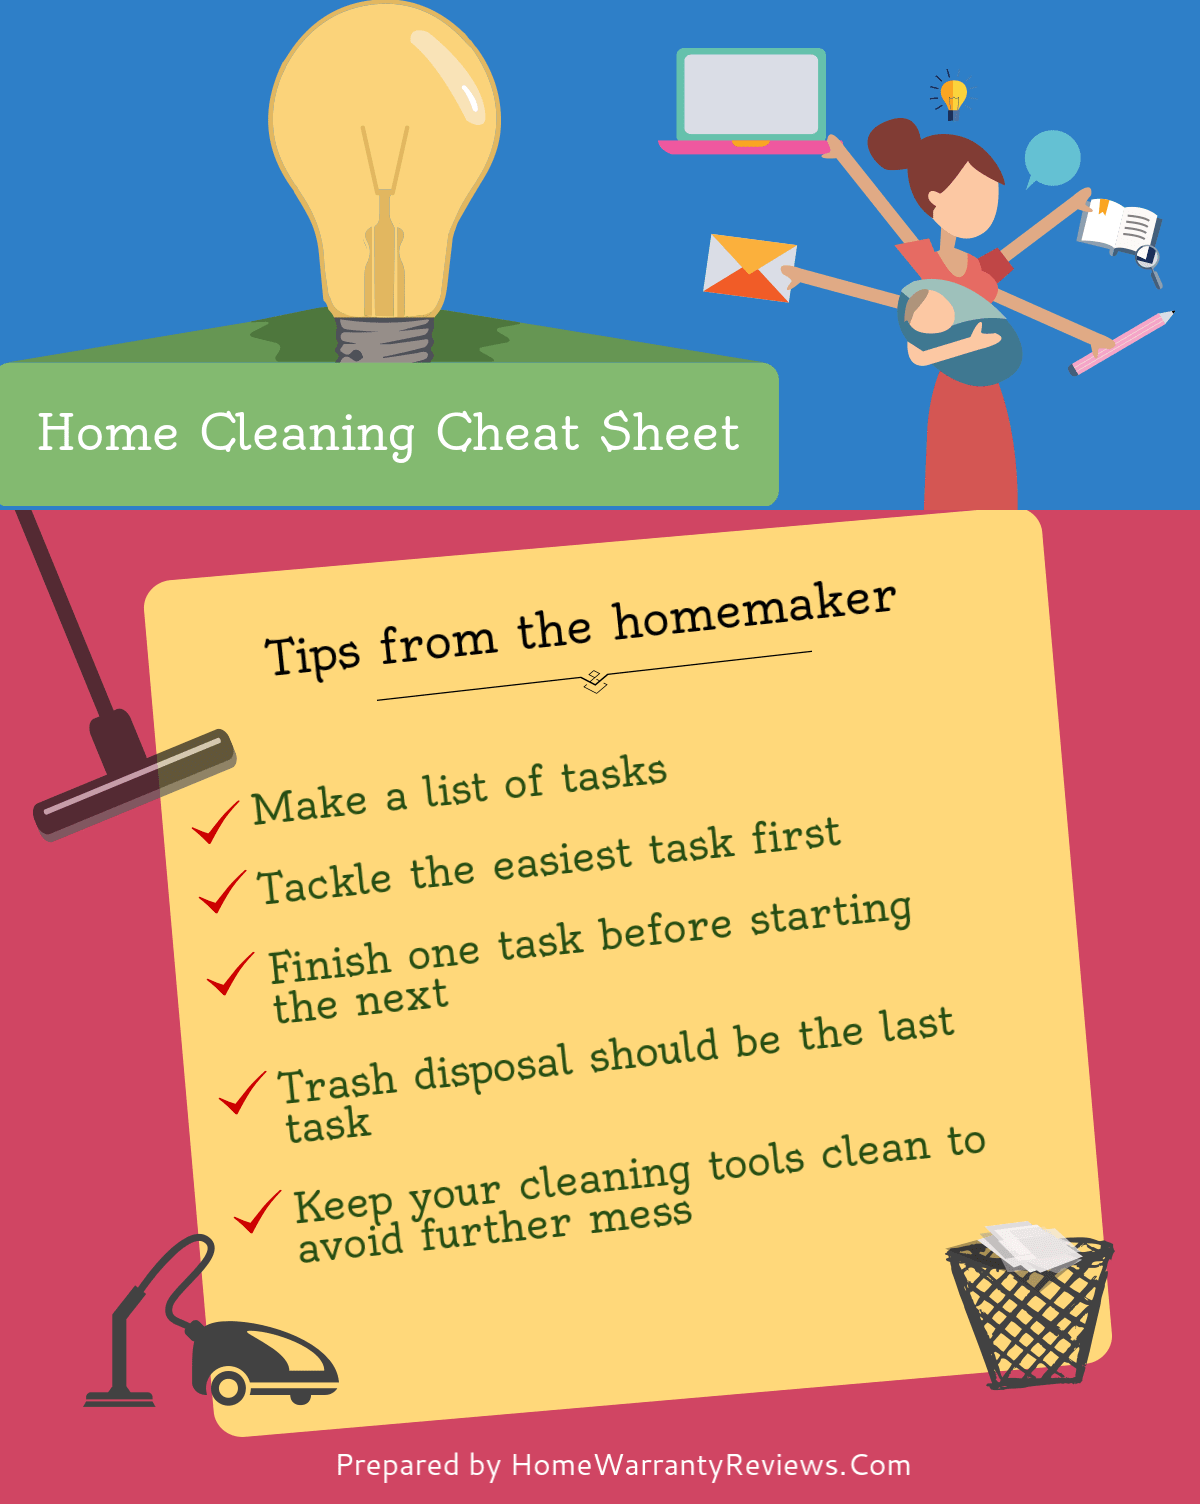 5 cleaning hacks for a spotless home